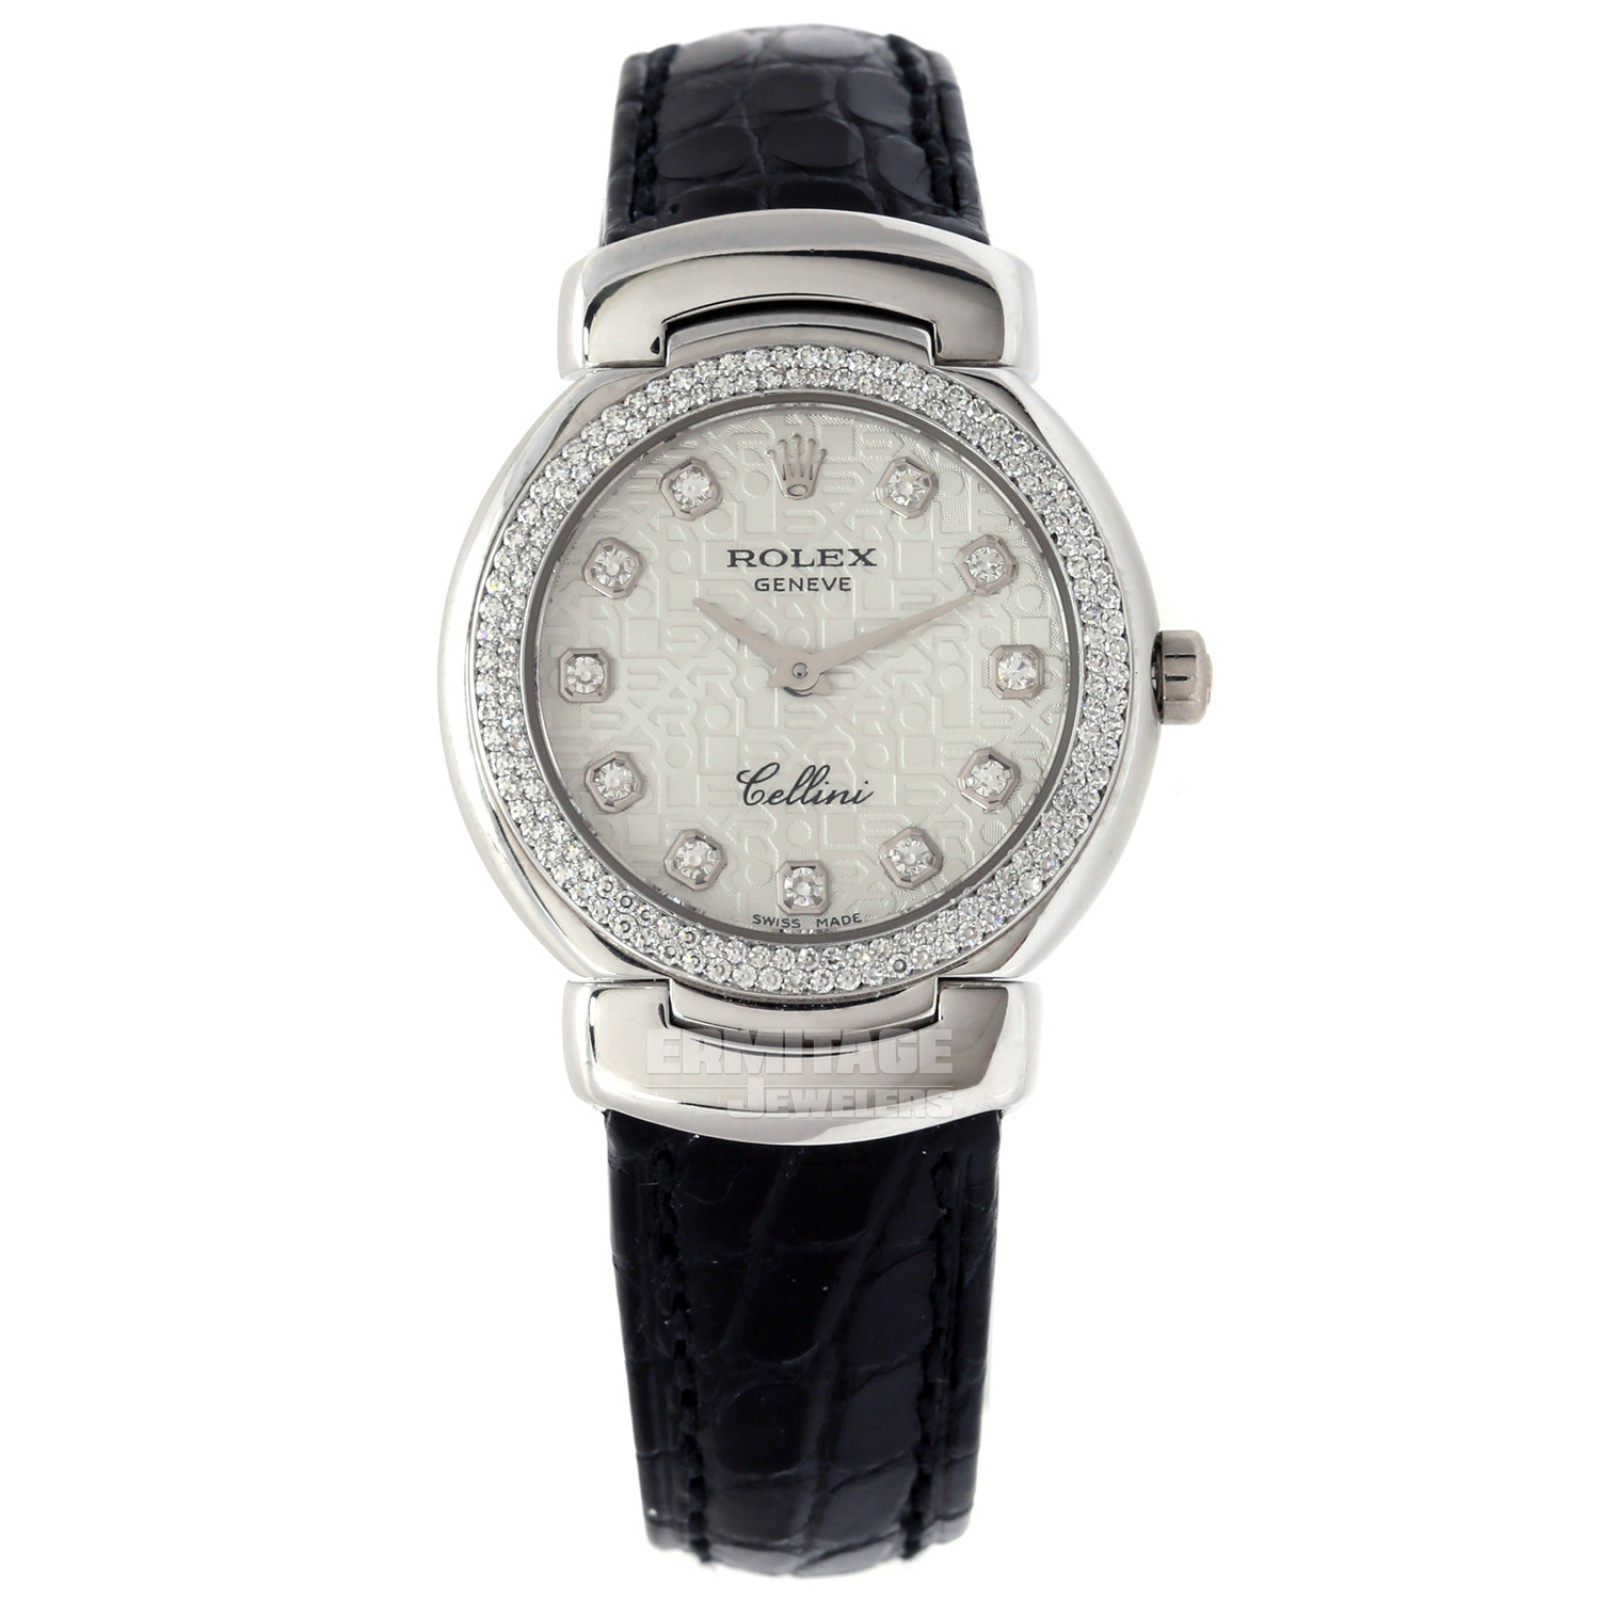 Rolex Cellini 6671 with Silver Dial